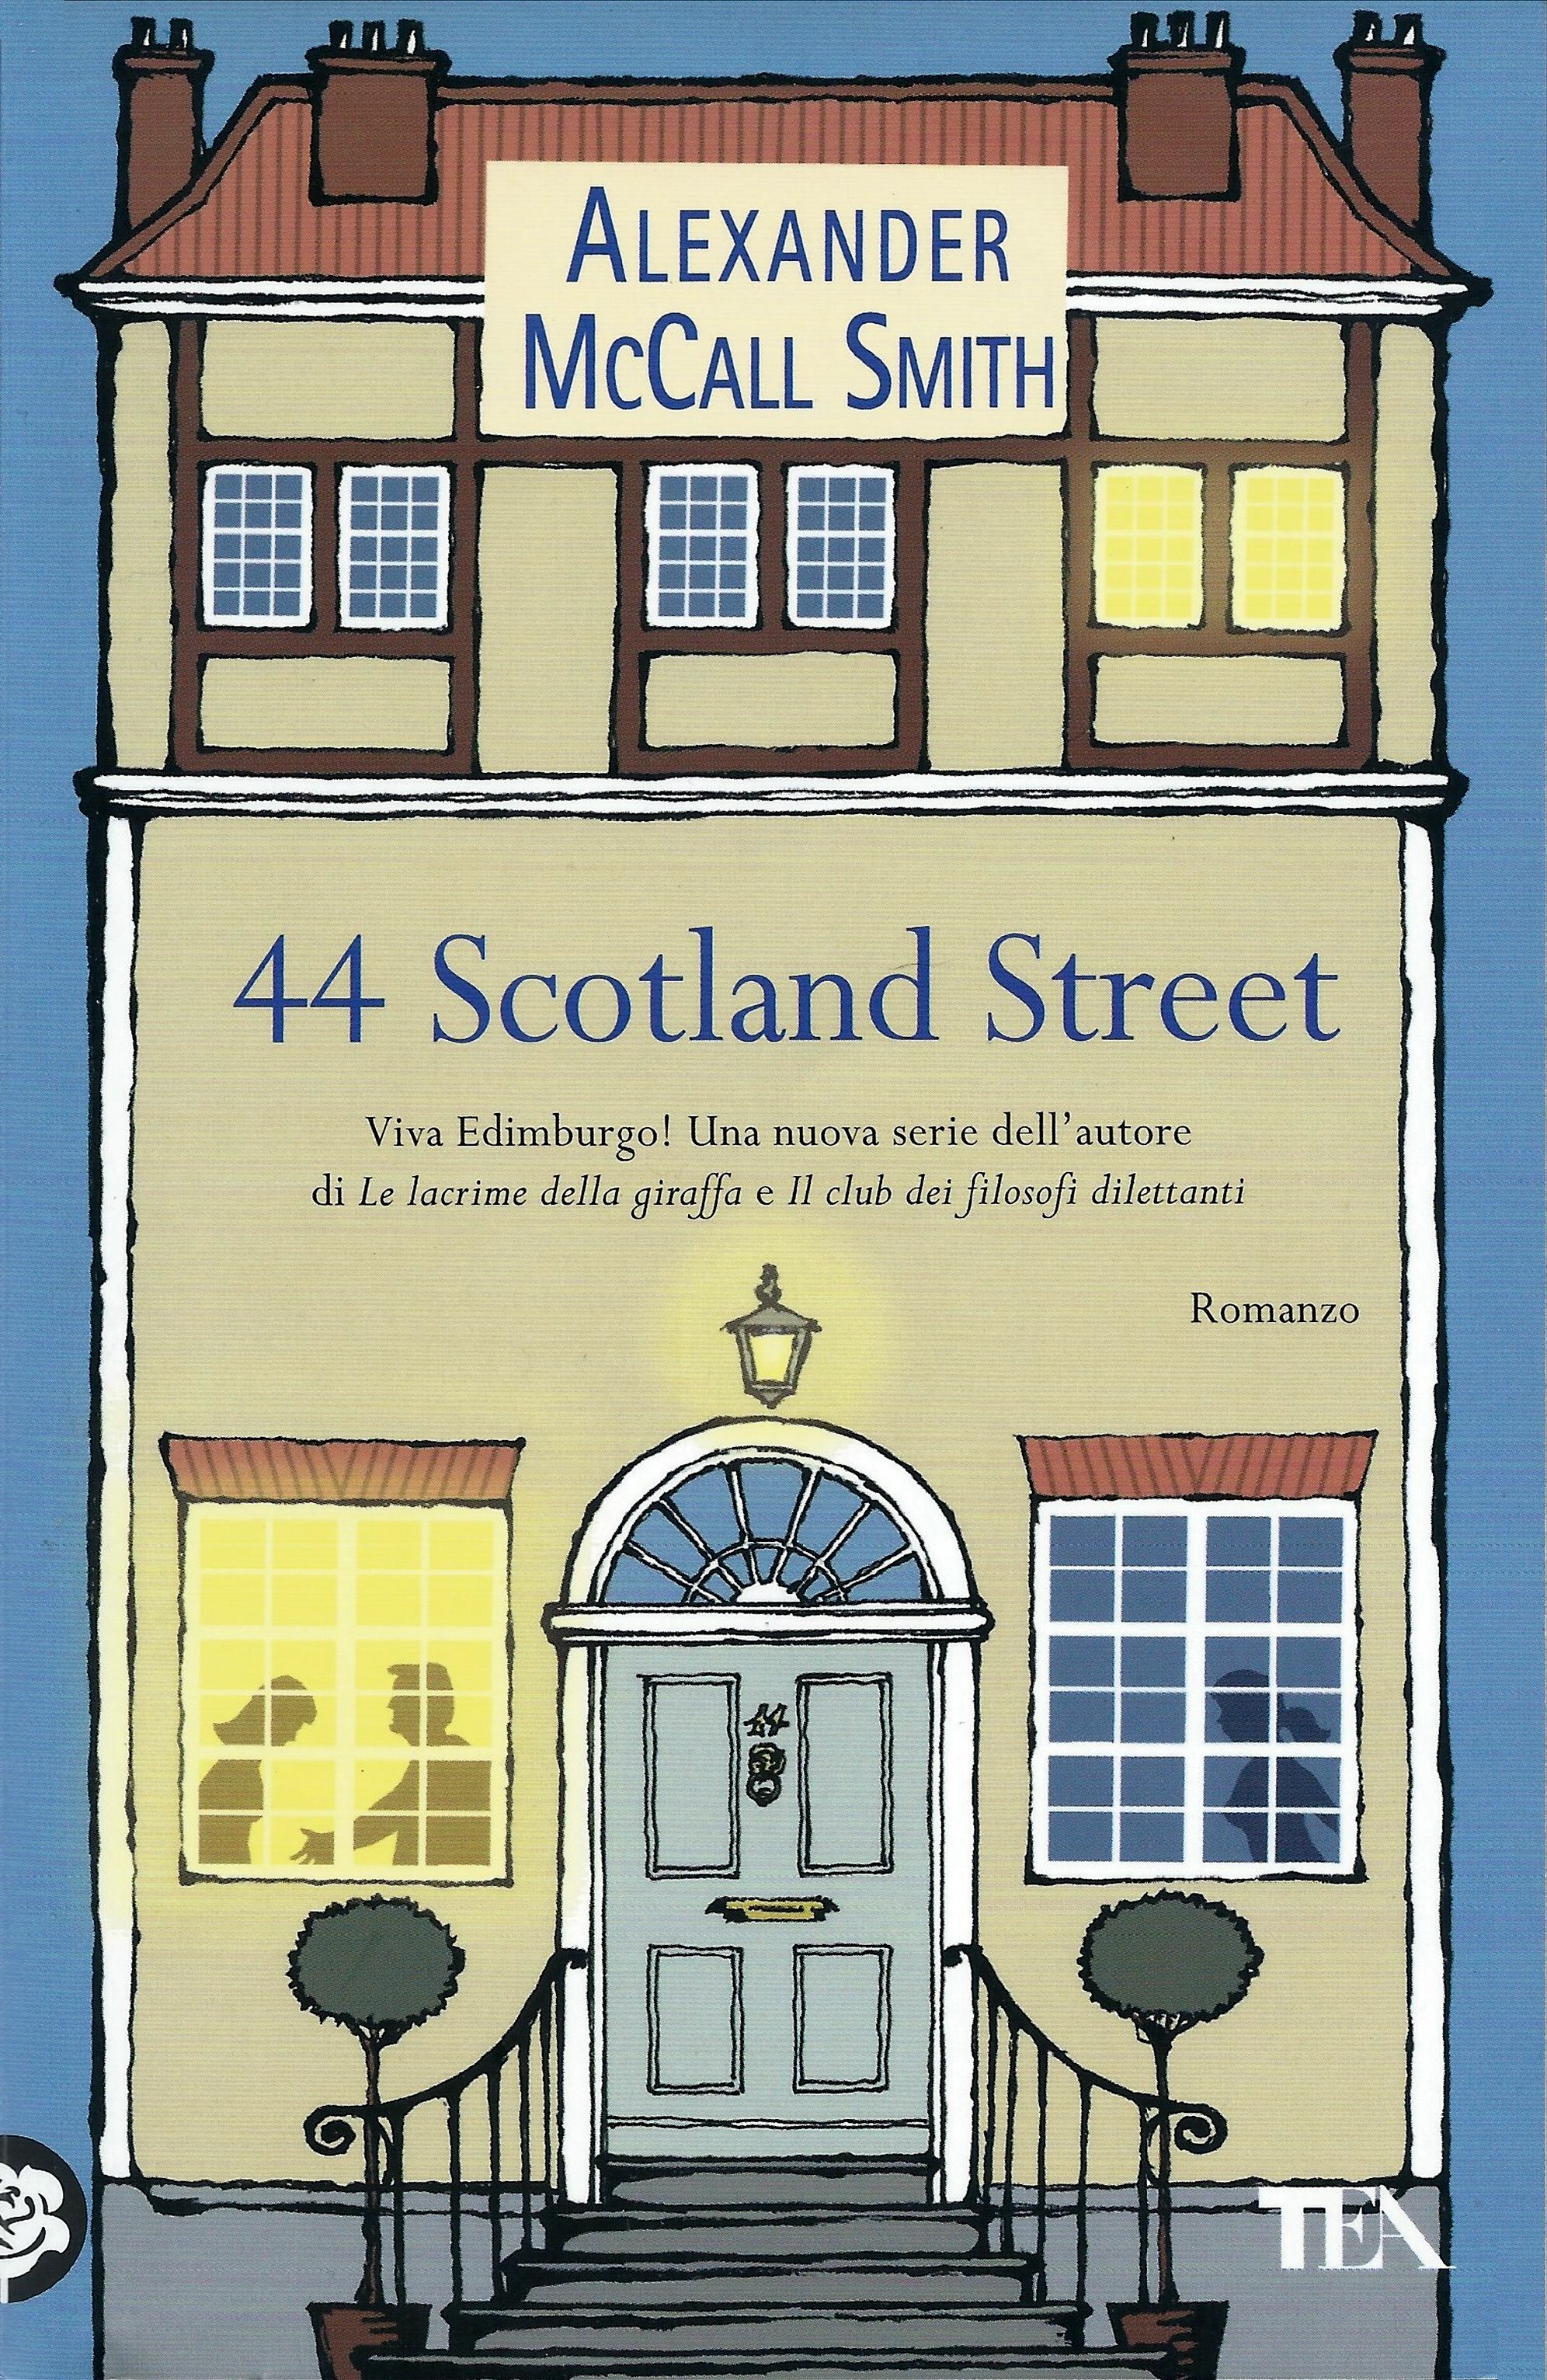 More about 44 Scotland Street